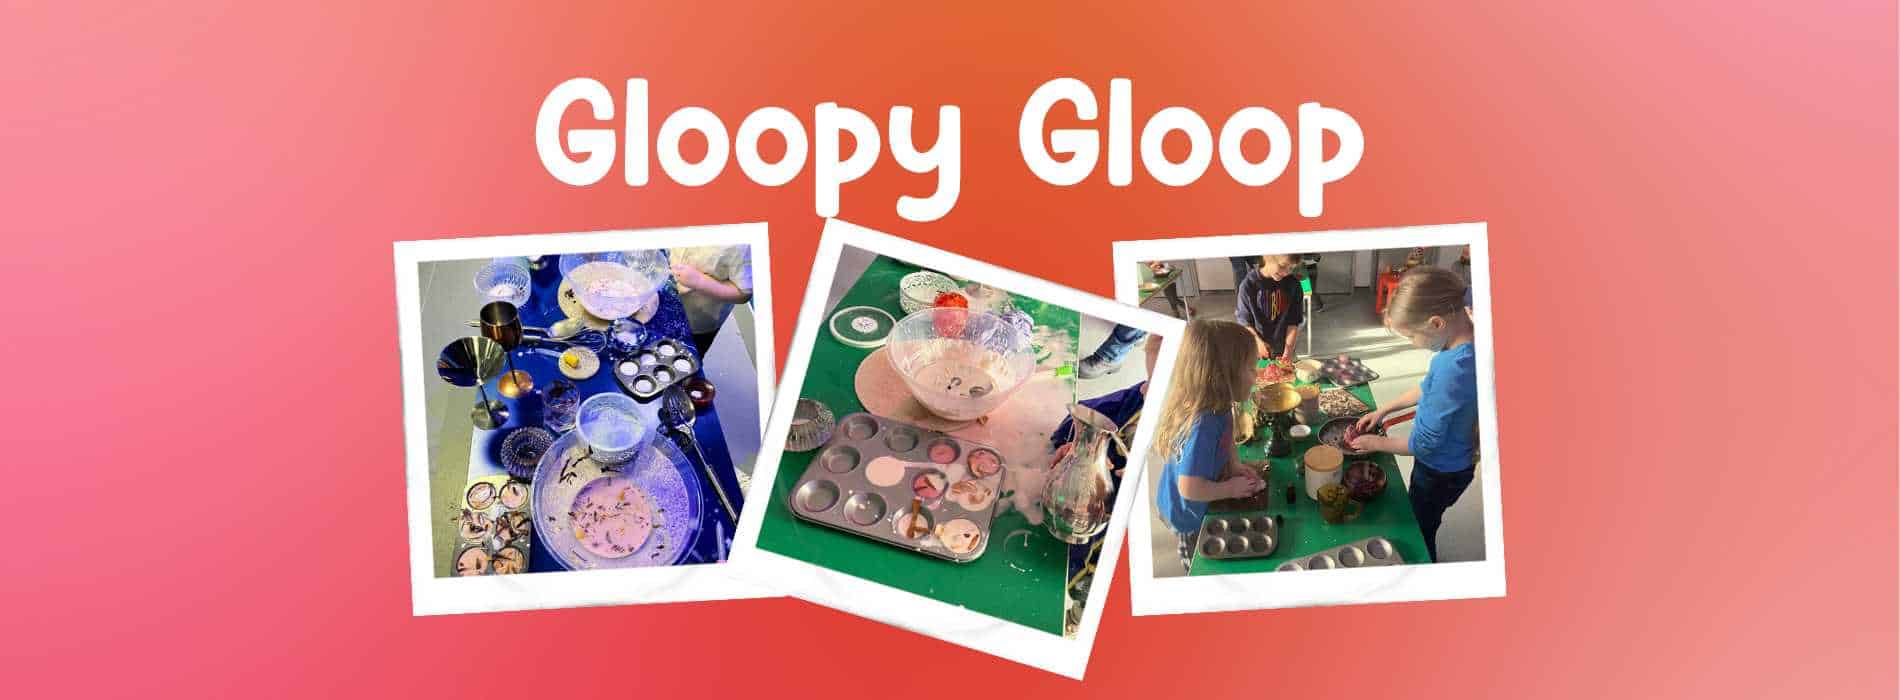 mixing, pouring, plodging and playing with ingredients to create gloopy gloop as part of our authentic play series